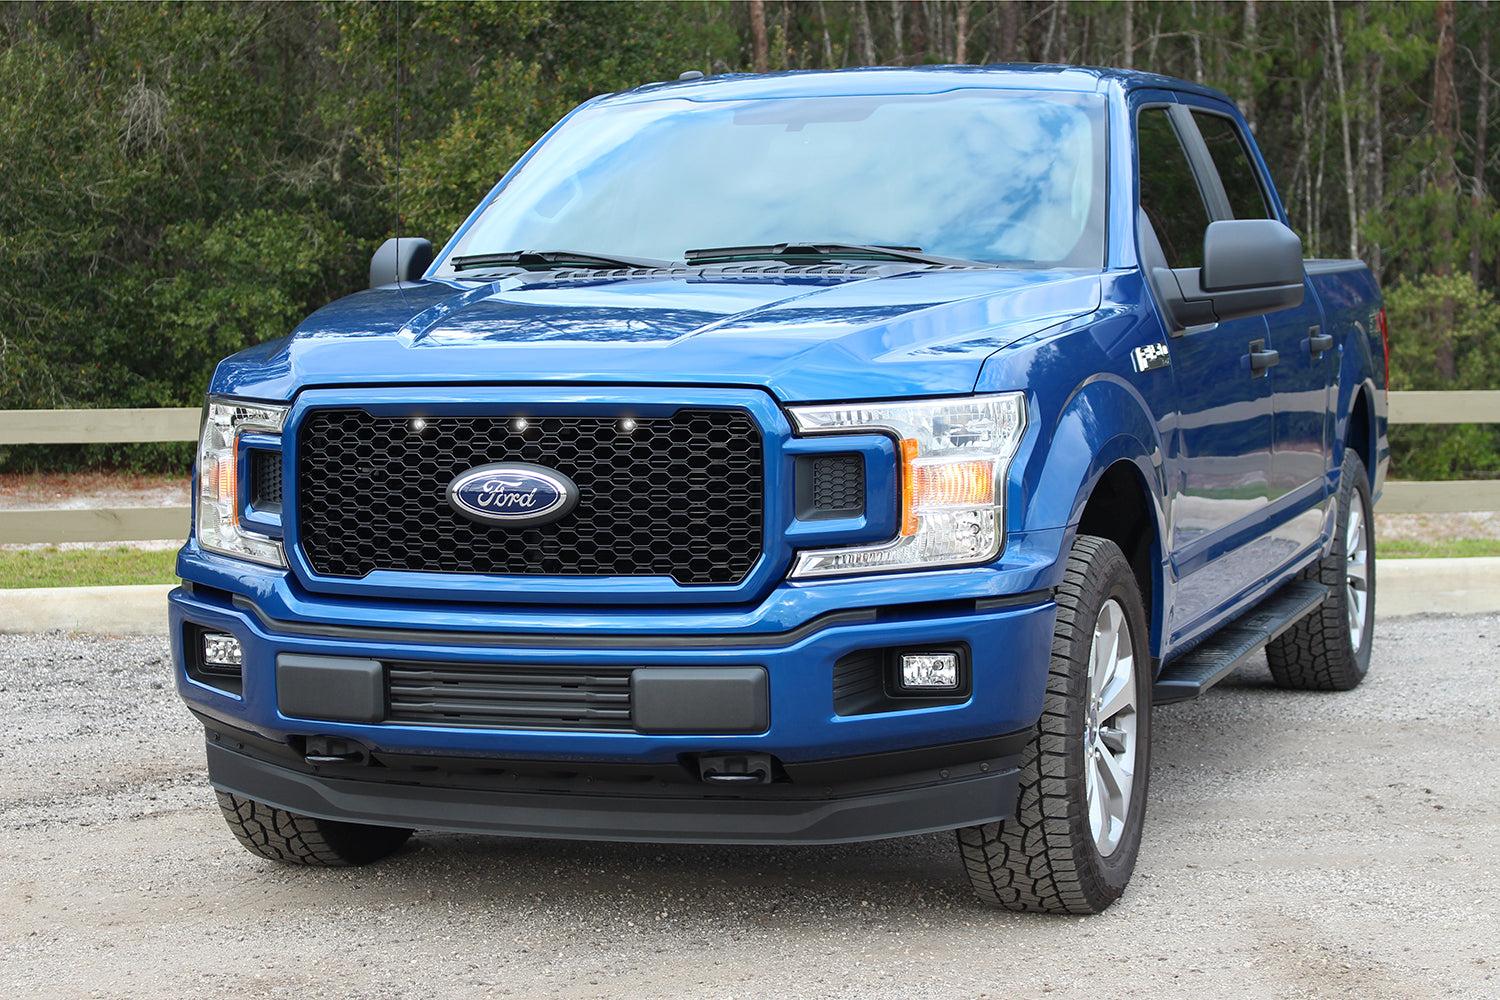 Starkey Ford F-150 Raptor Style Grille Light Kit - Fits STX and Lariat Special Edition (2018-2020)